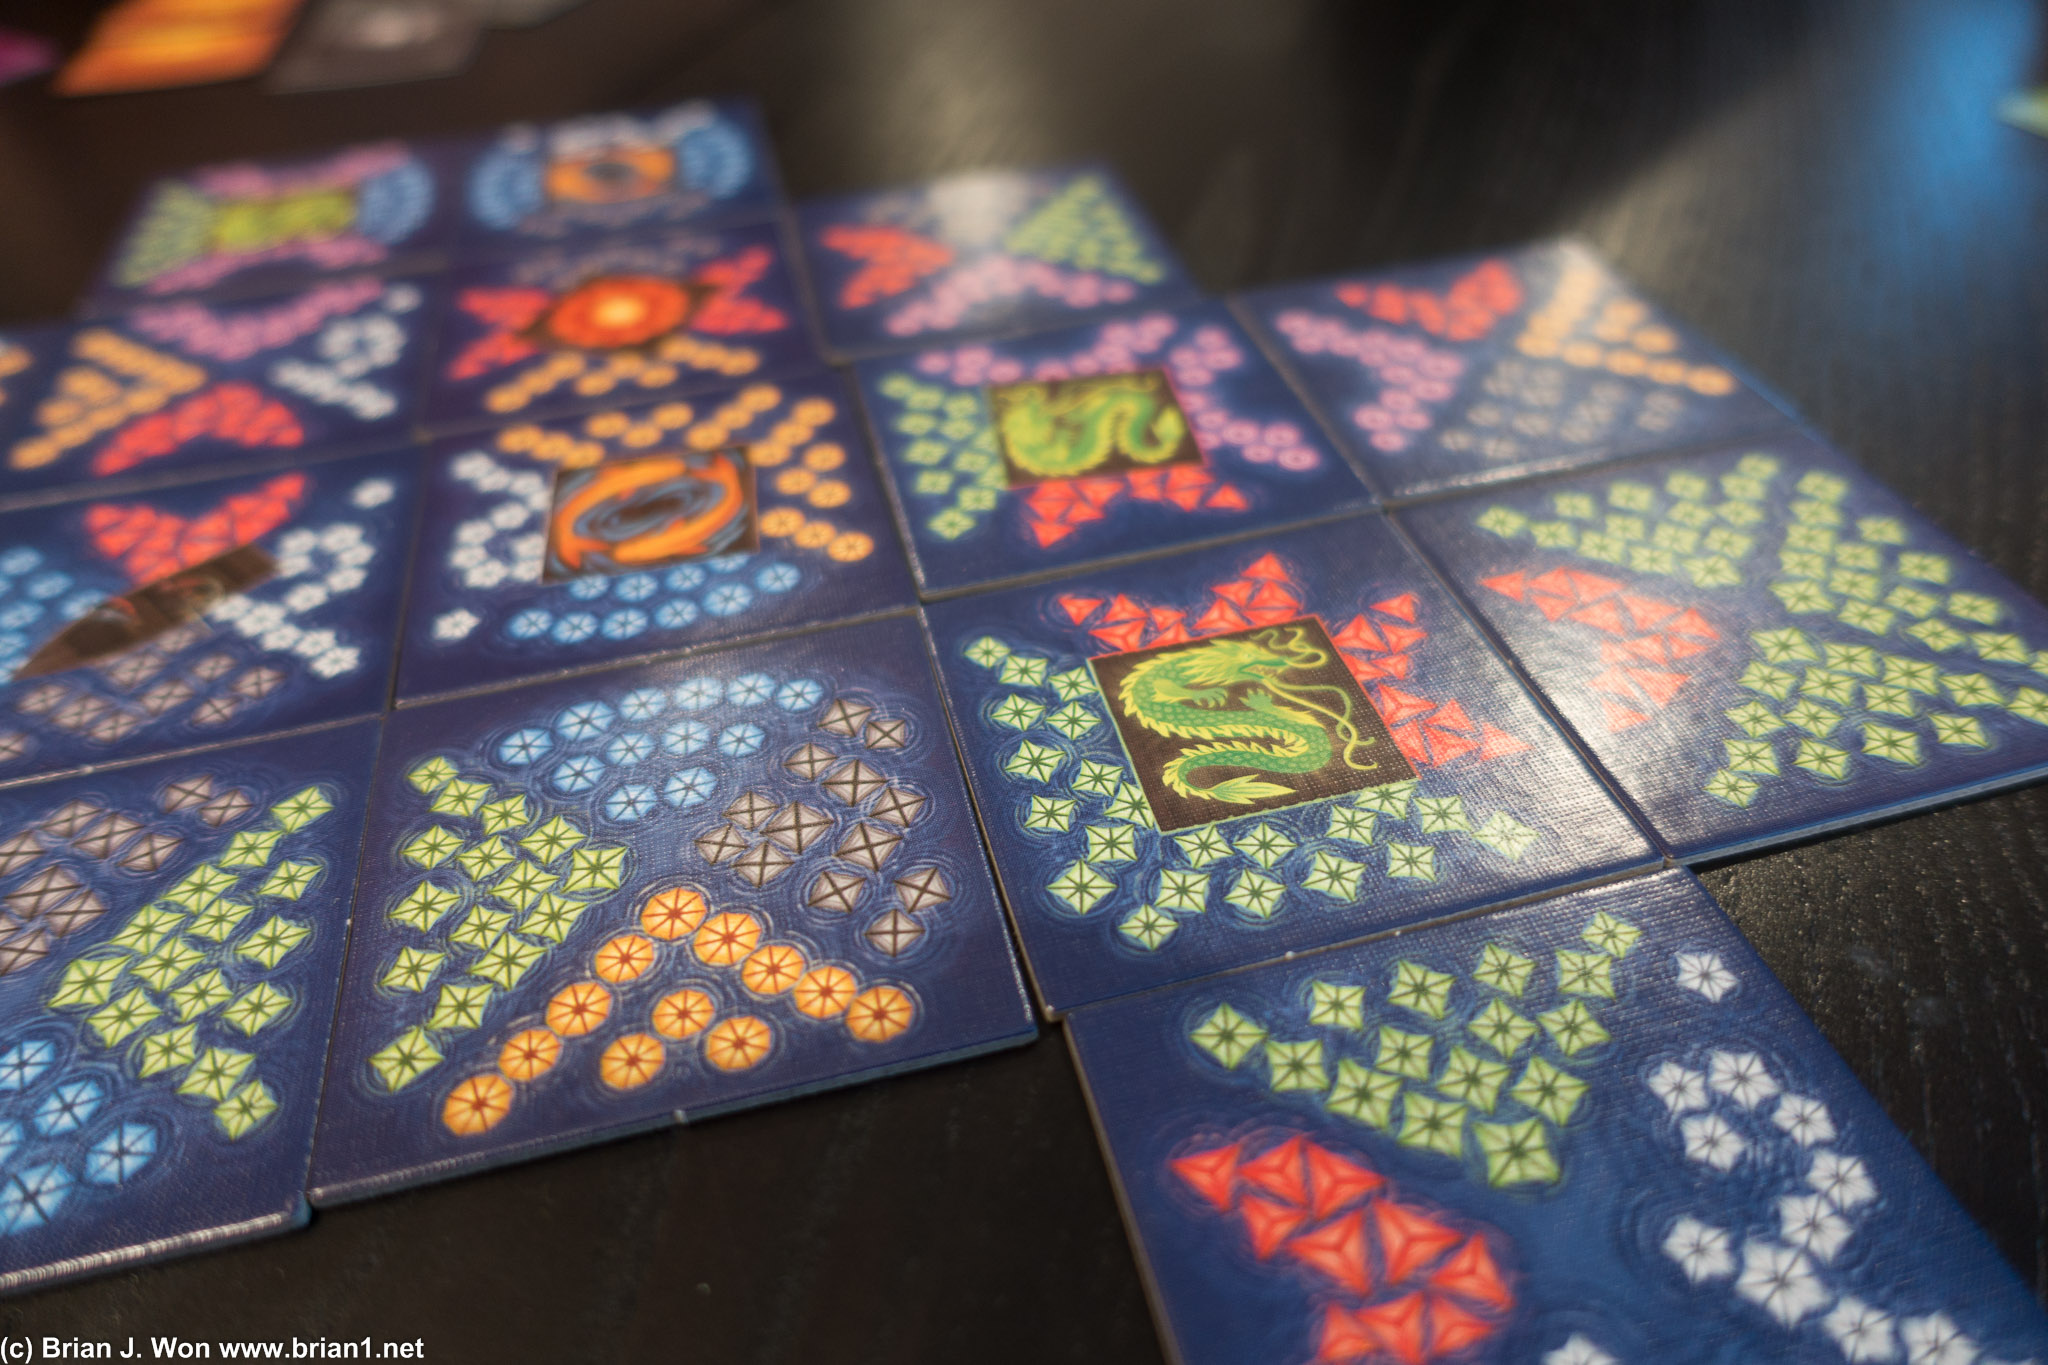 Lantern Festival, perhaps the easiest and most casual game we played.